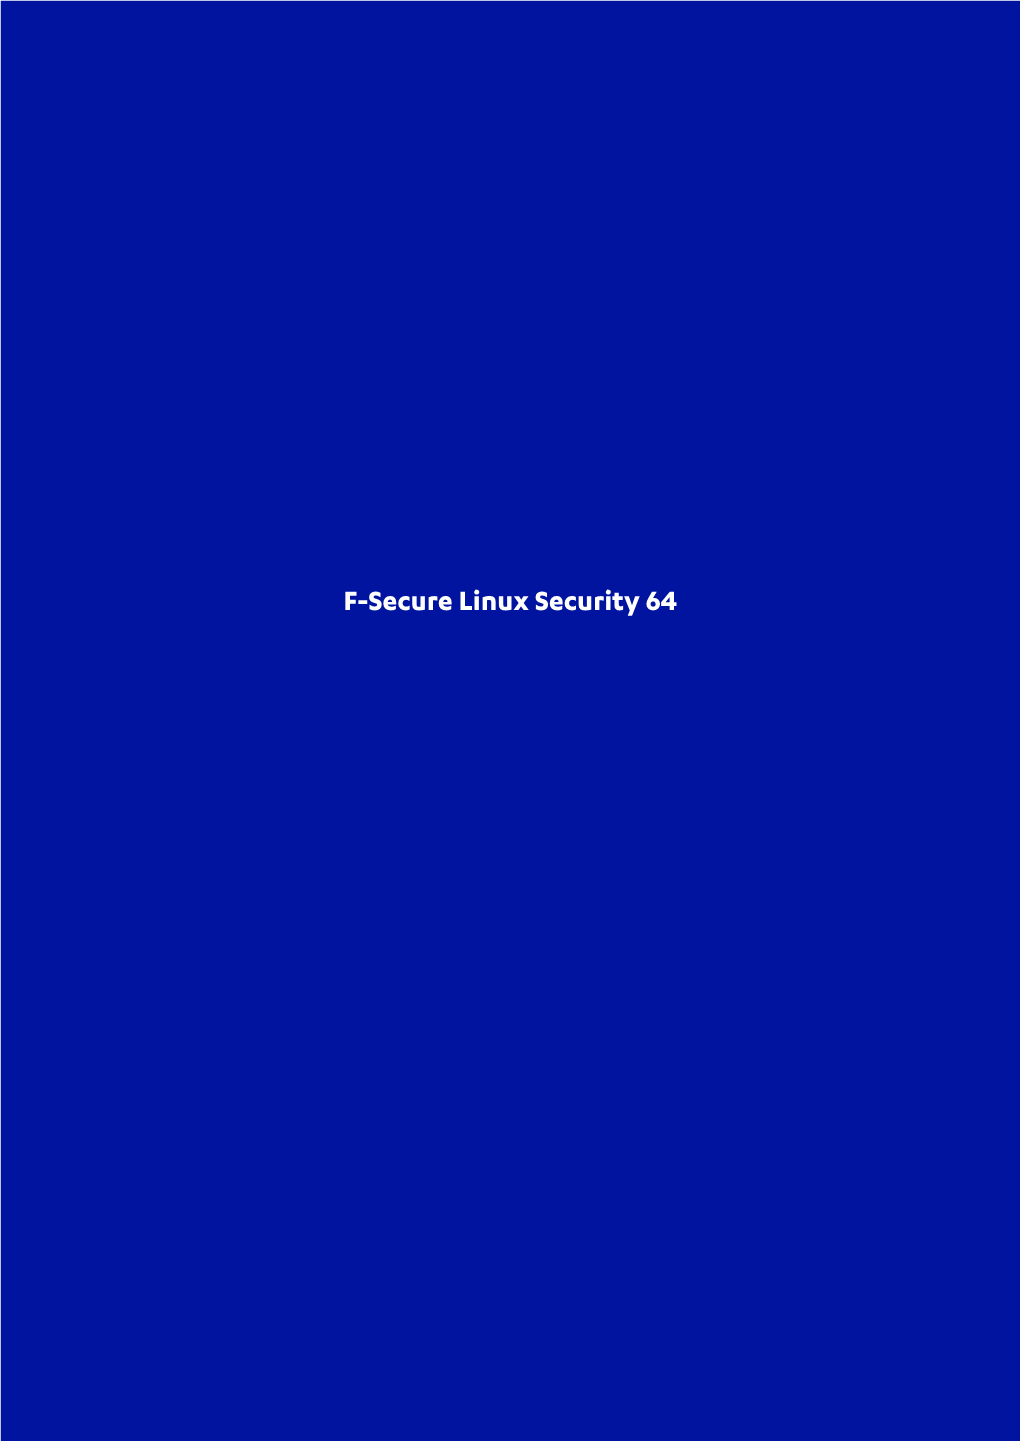 F-Secure Linux Security 64 Ii | Contents | F-Secure Linux Security 64